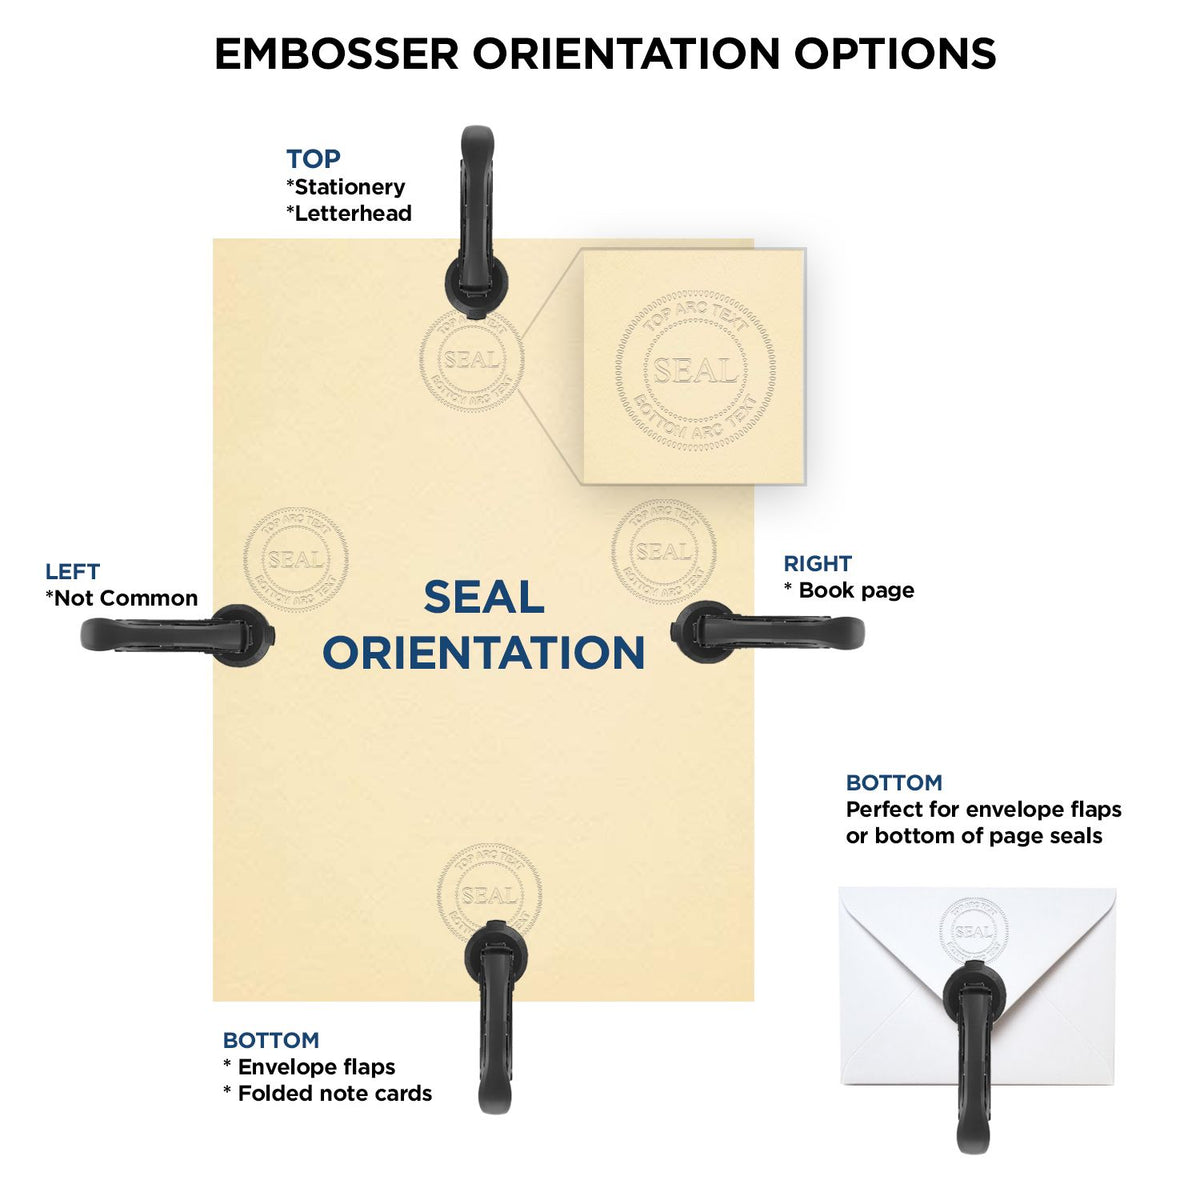 An infographic for the Heavy Duty Cast Iron Oregon Geologist Seal Embosser showing embosser orientation, this is showing examples of a top, bottom, right and left insert.